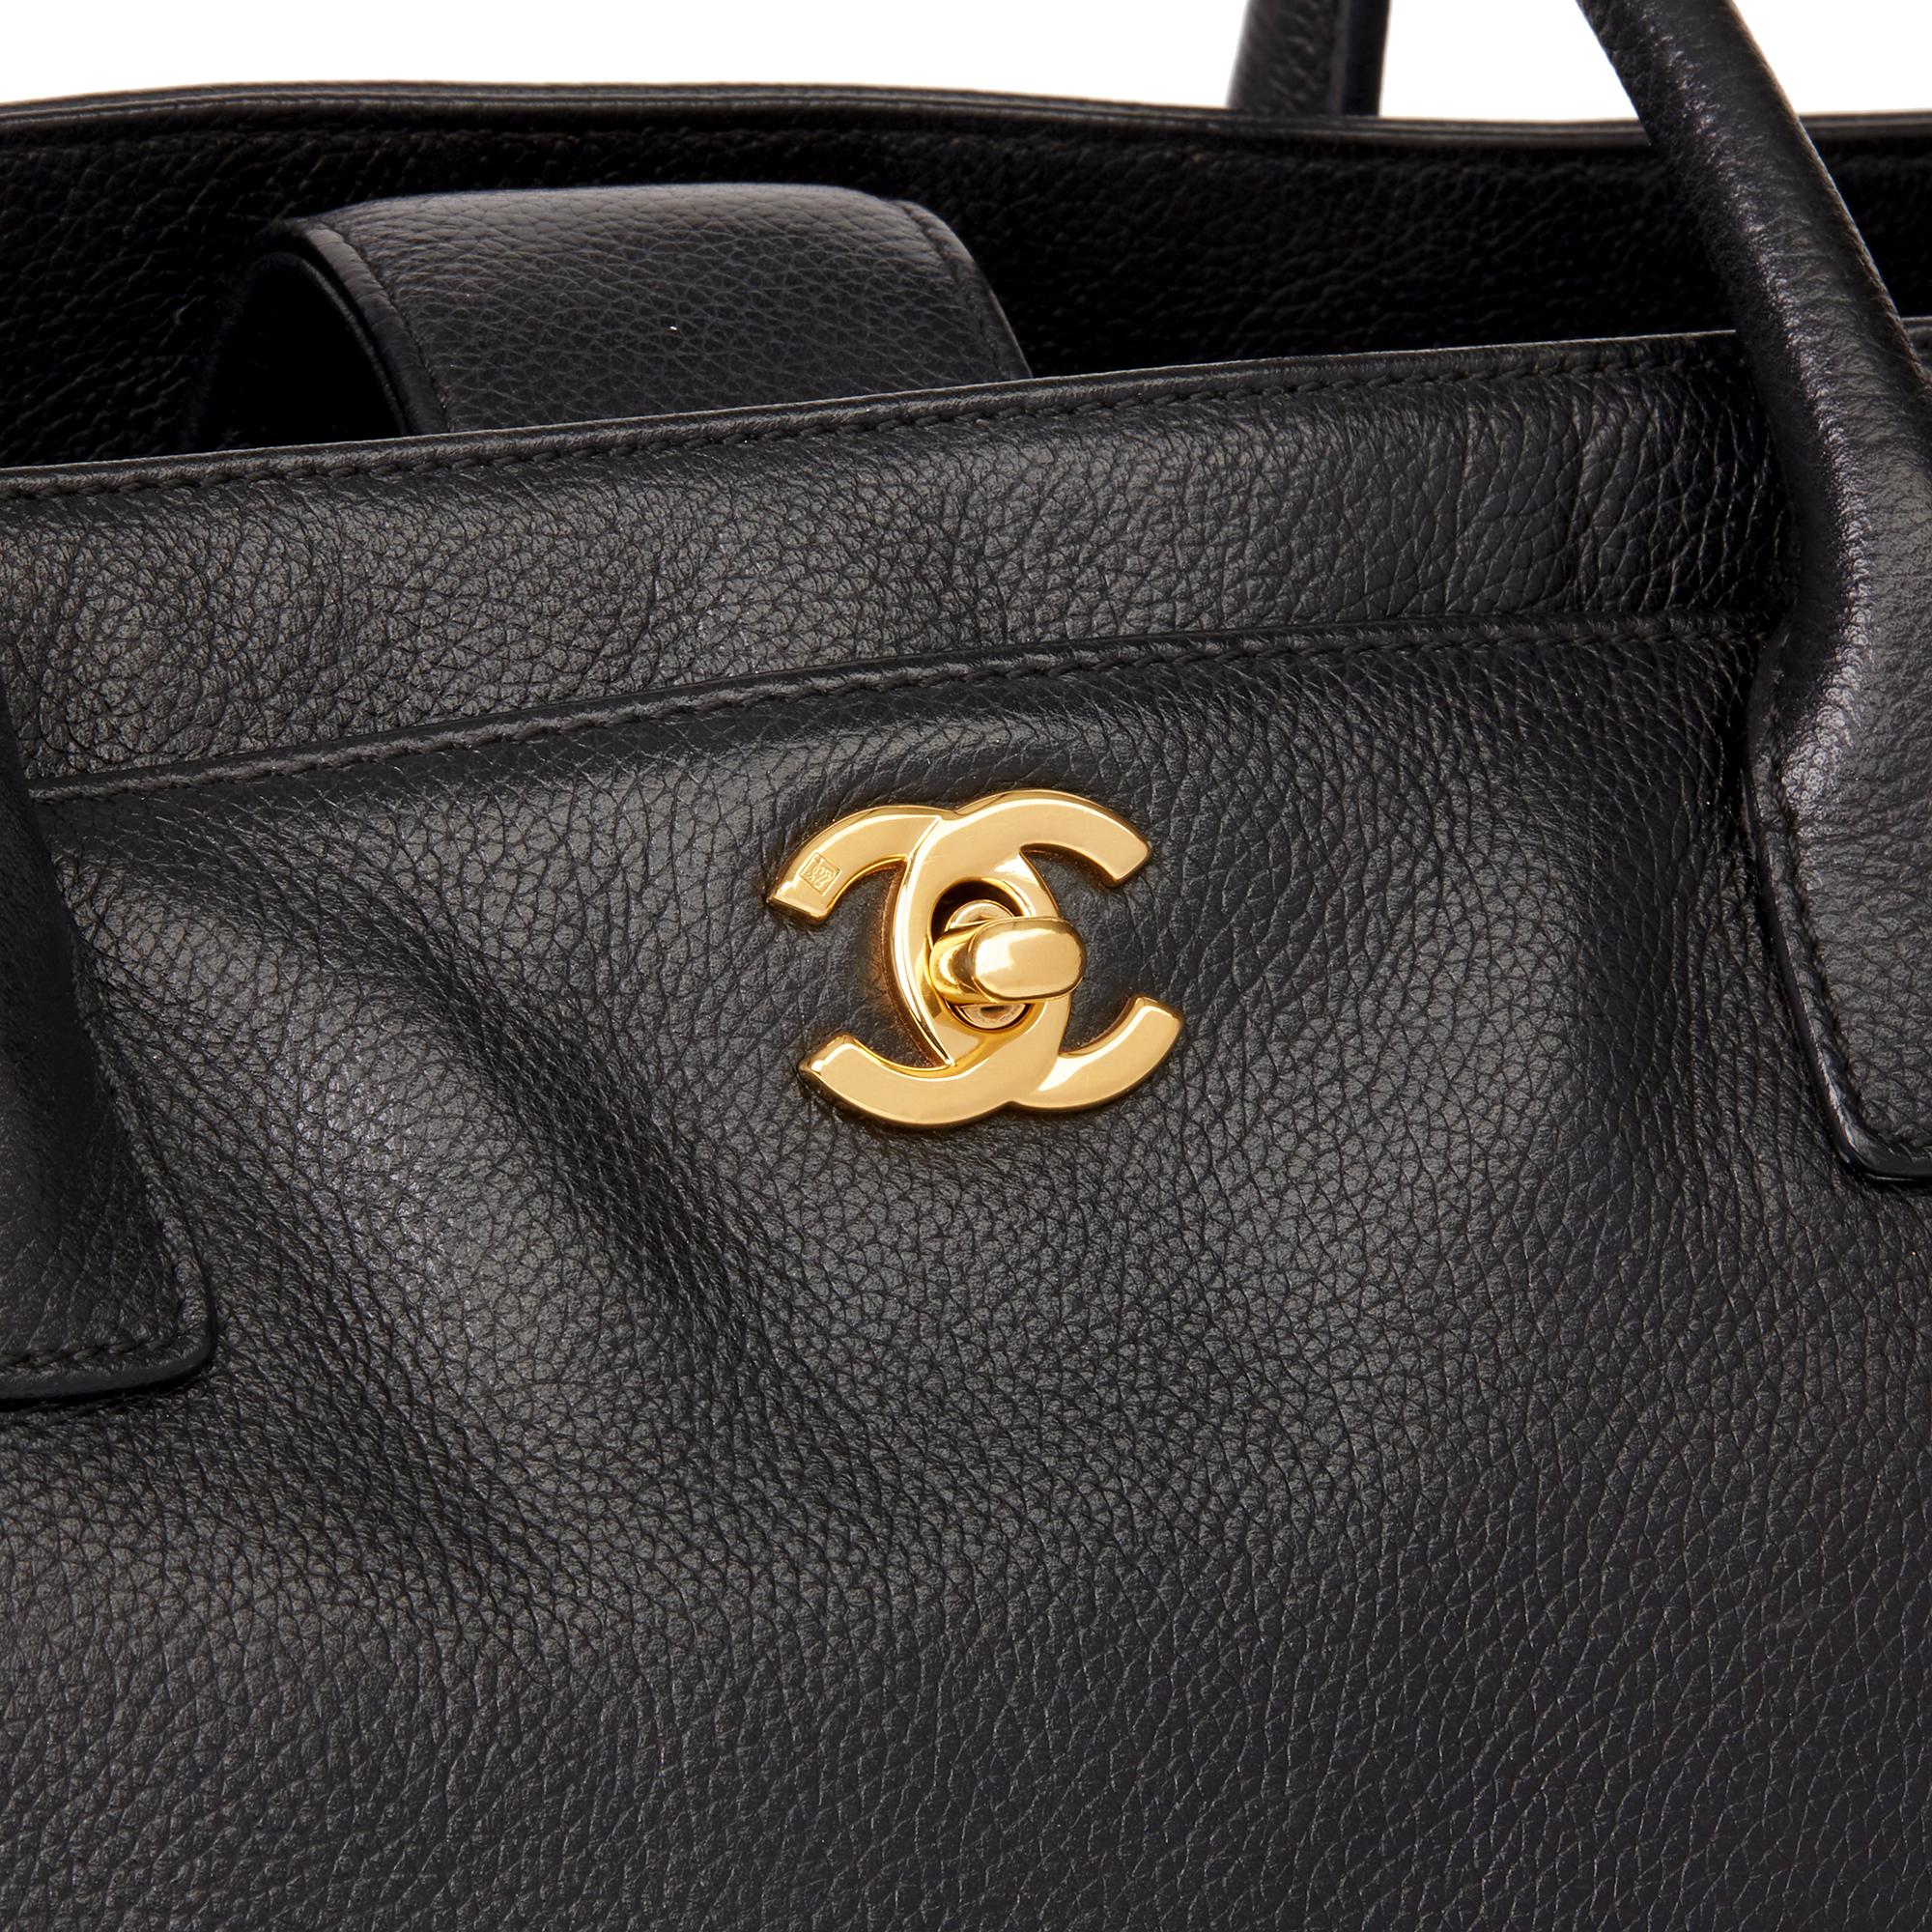 2009 Chanel Black Calfskin Leather Cerf Tote 3